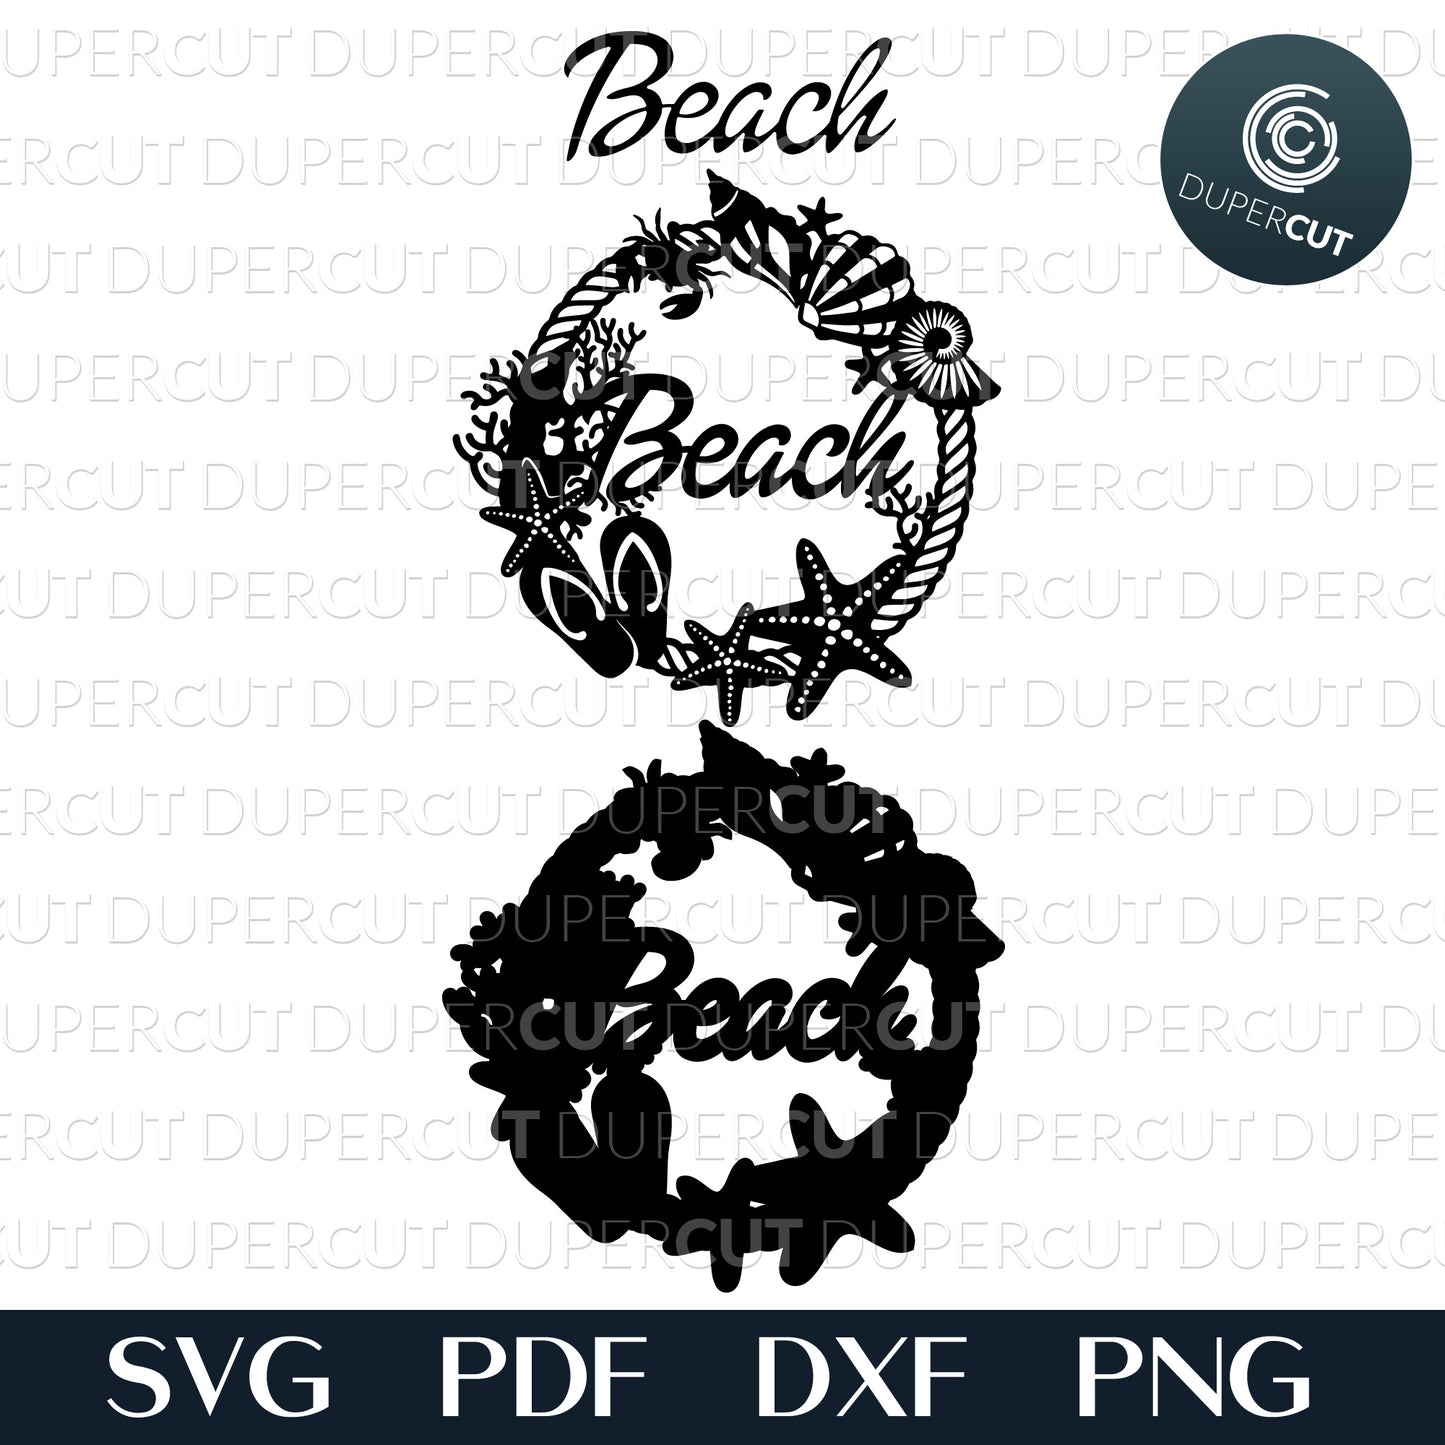 Layered laser files. Seashell beach wreath. SVG JPEG DXF files. Template for paper cutting, laser cutting. For use with Cricut, Glowforge, Silhouette Cameo, CNC machines. Personal or commercial license.